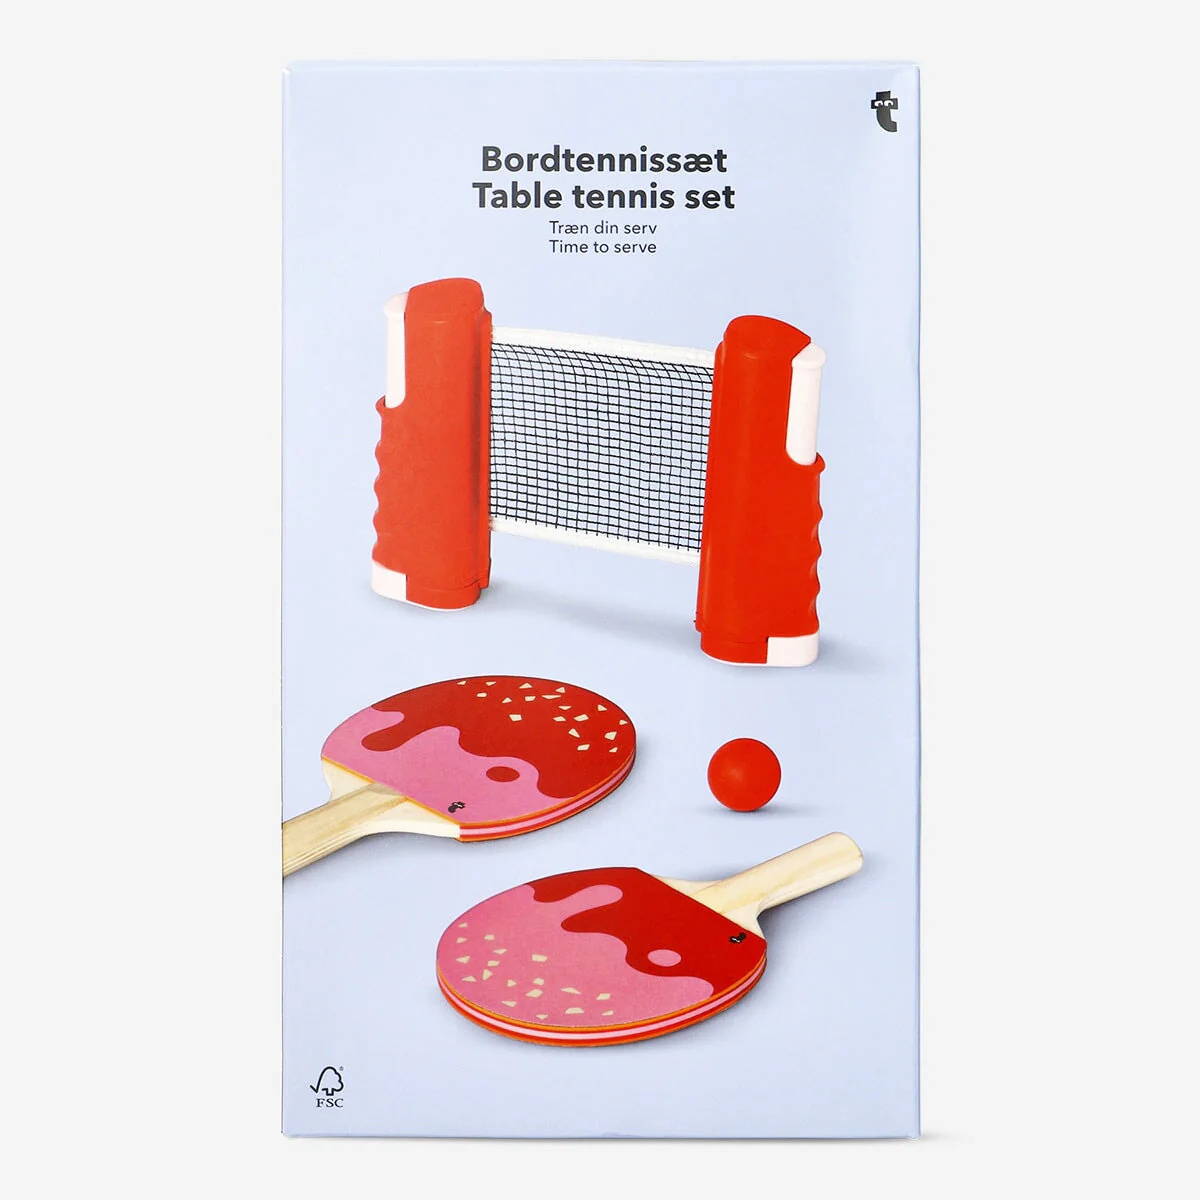 Red and pink table tennis paddles with a mini net and red ball, packaged in a box, against a light blue background.